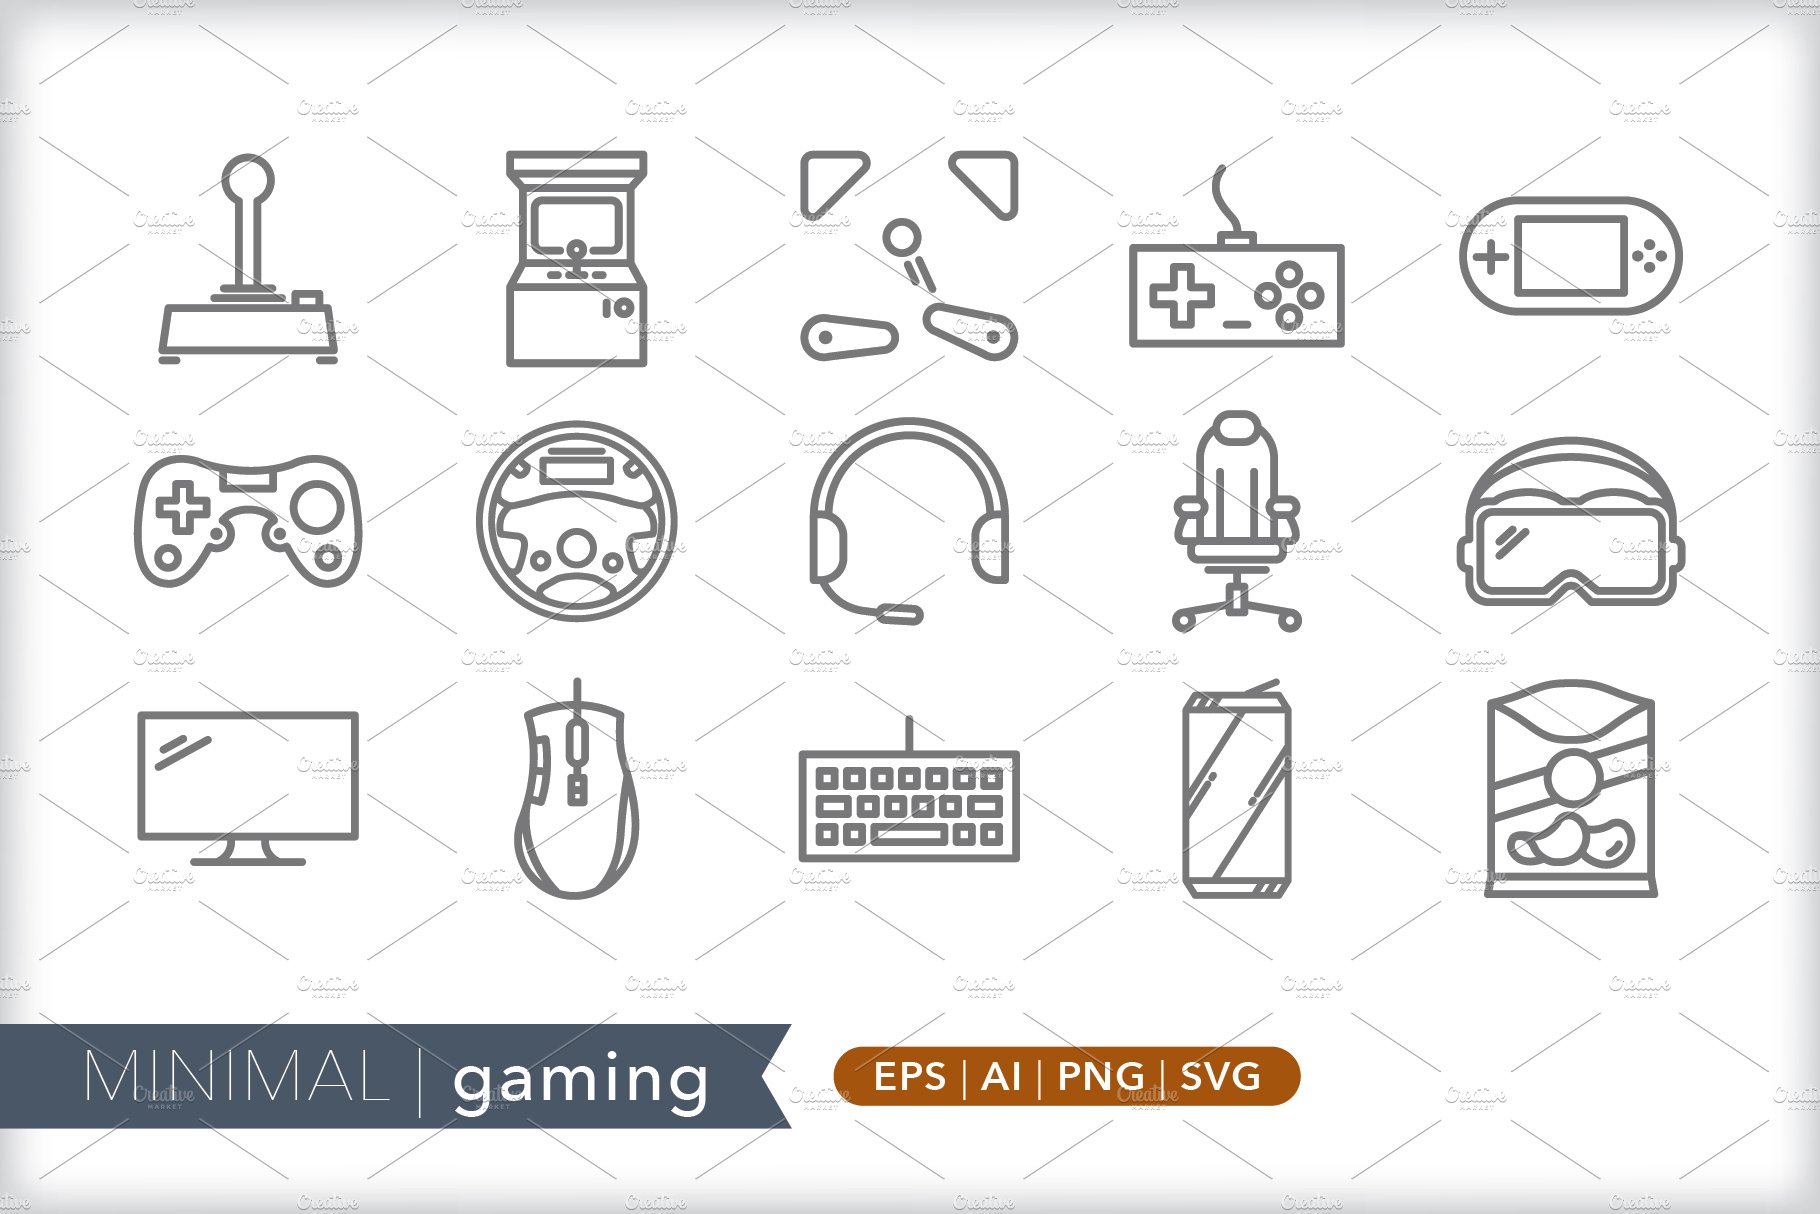 Minimal gaming icons cover image.